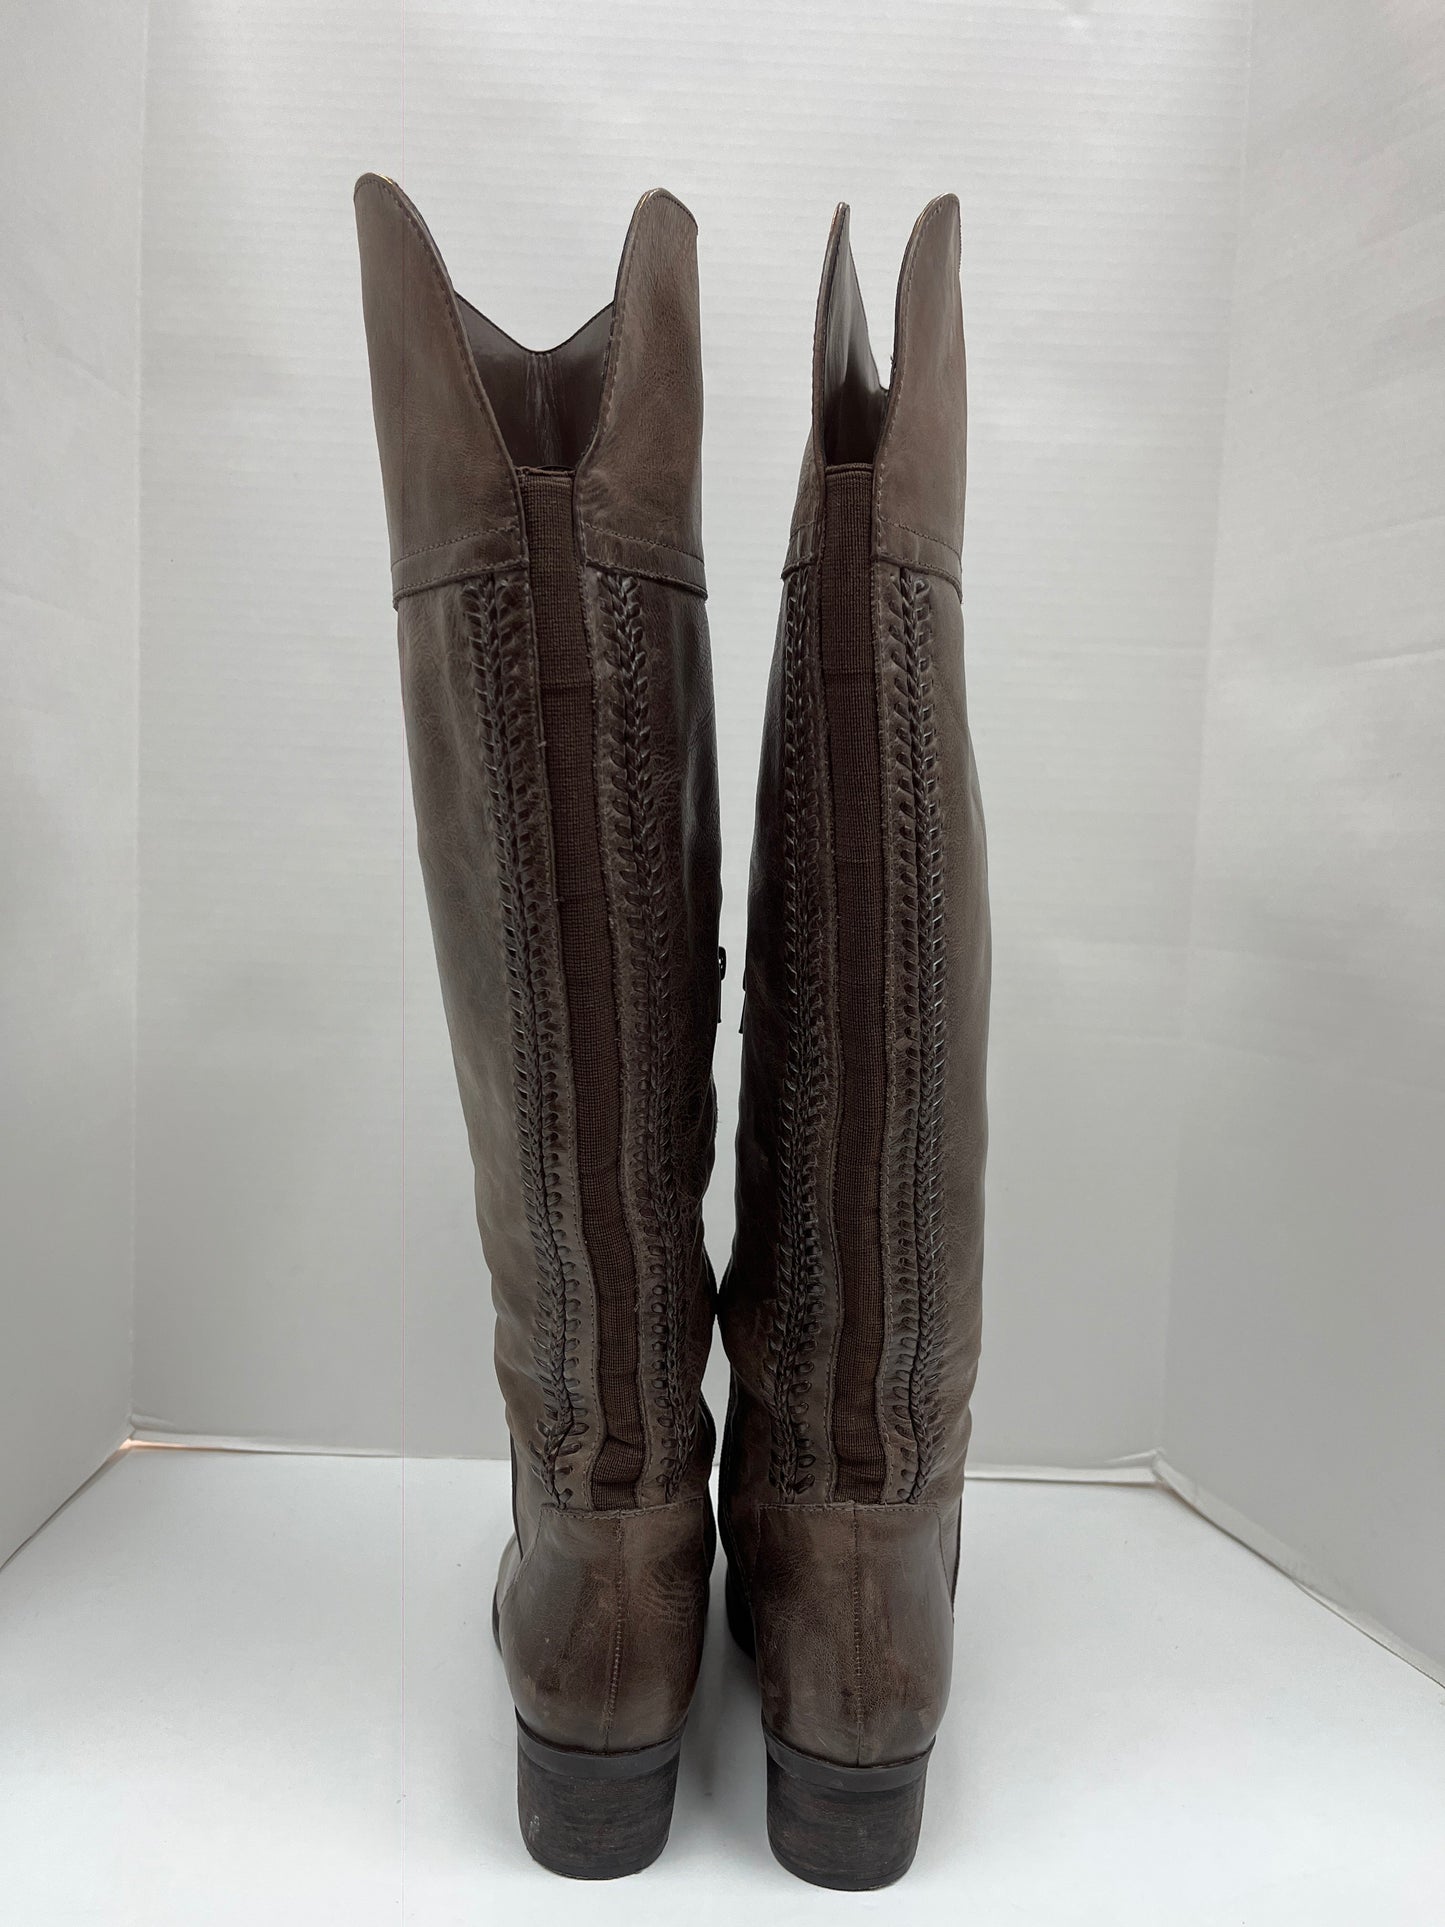 Boots Knee Flats By Vince Camuto  Size: 9.5